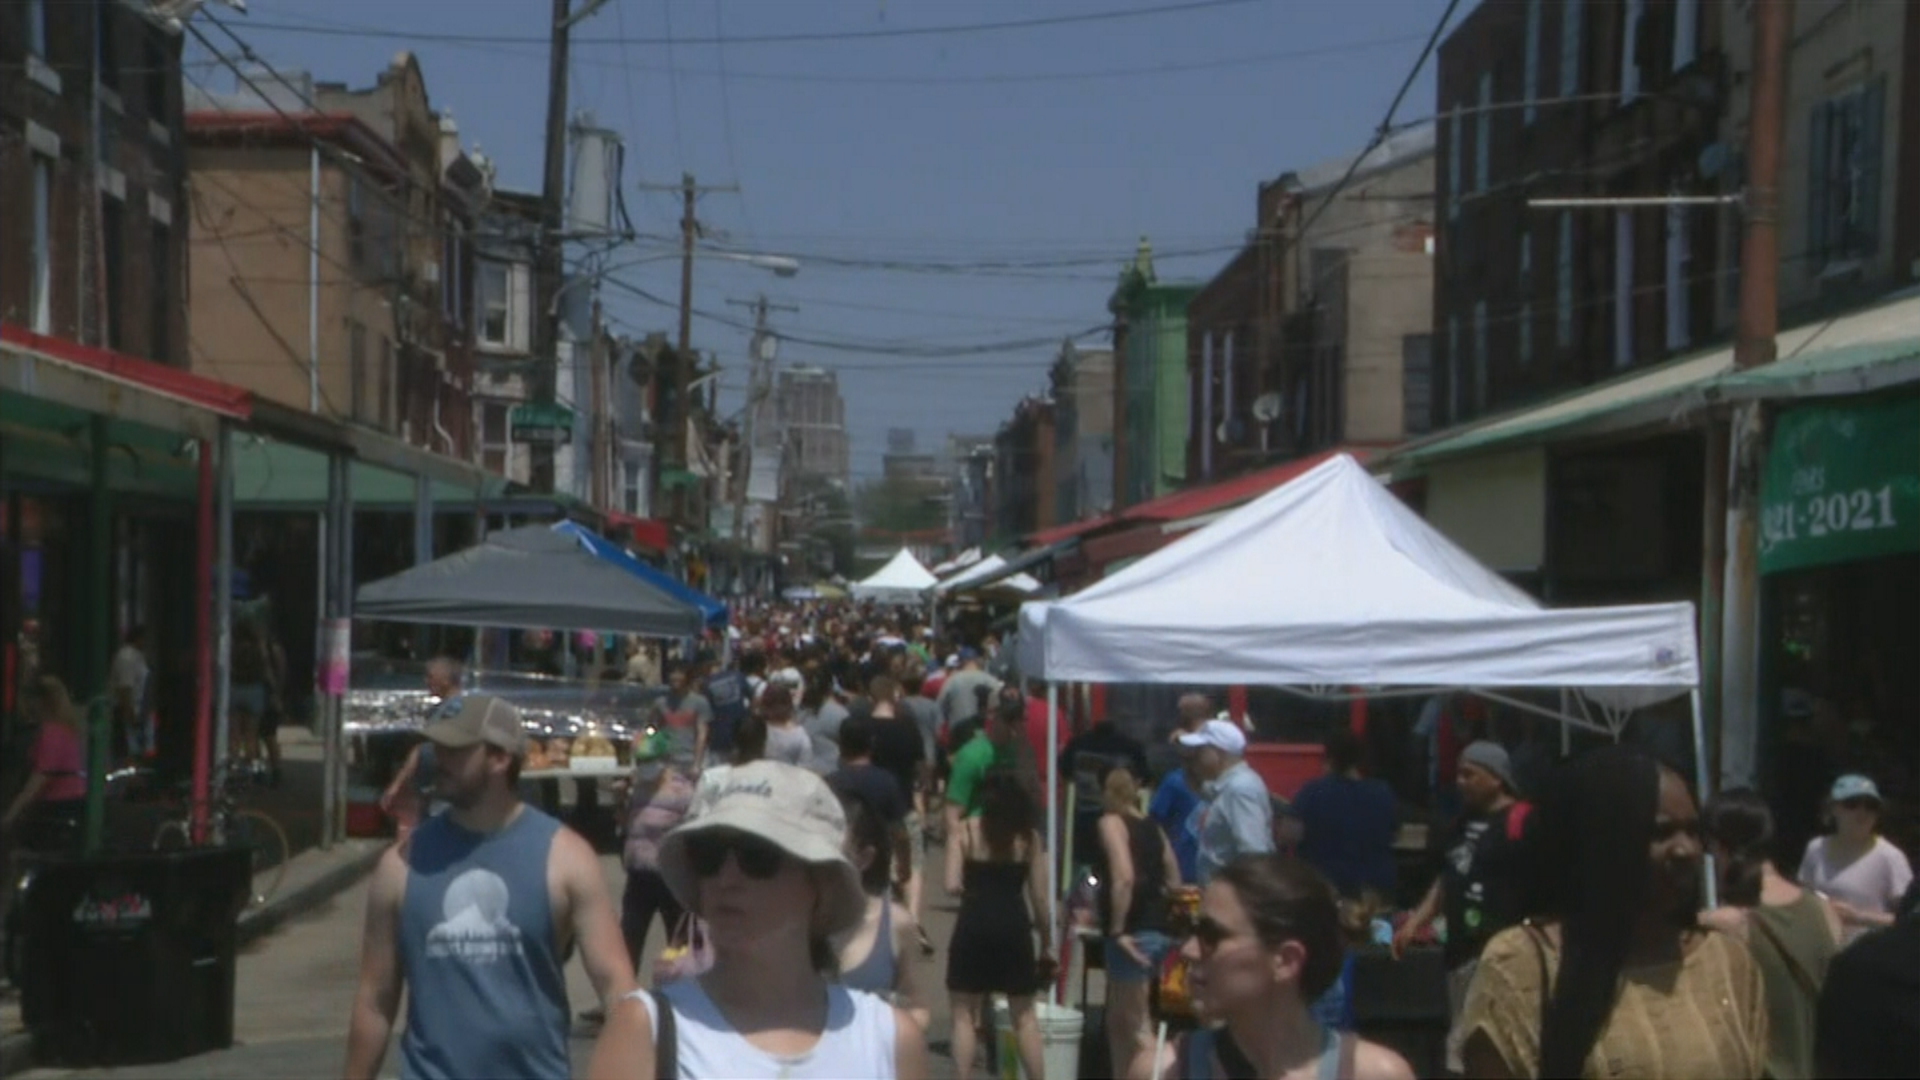 Italian Market Festival Returns To South Philadelphia After 2 Year Hiatus Due To COVID-19 Pandemic